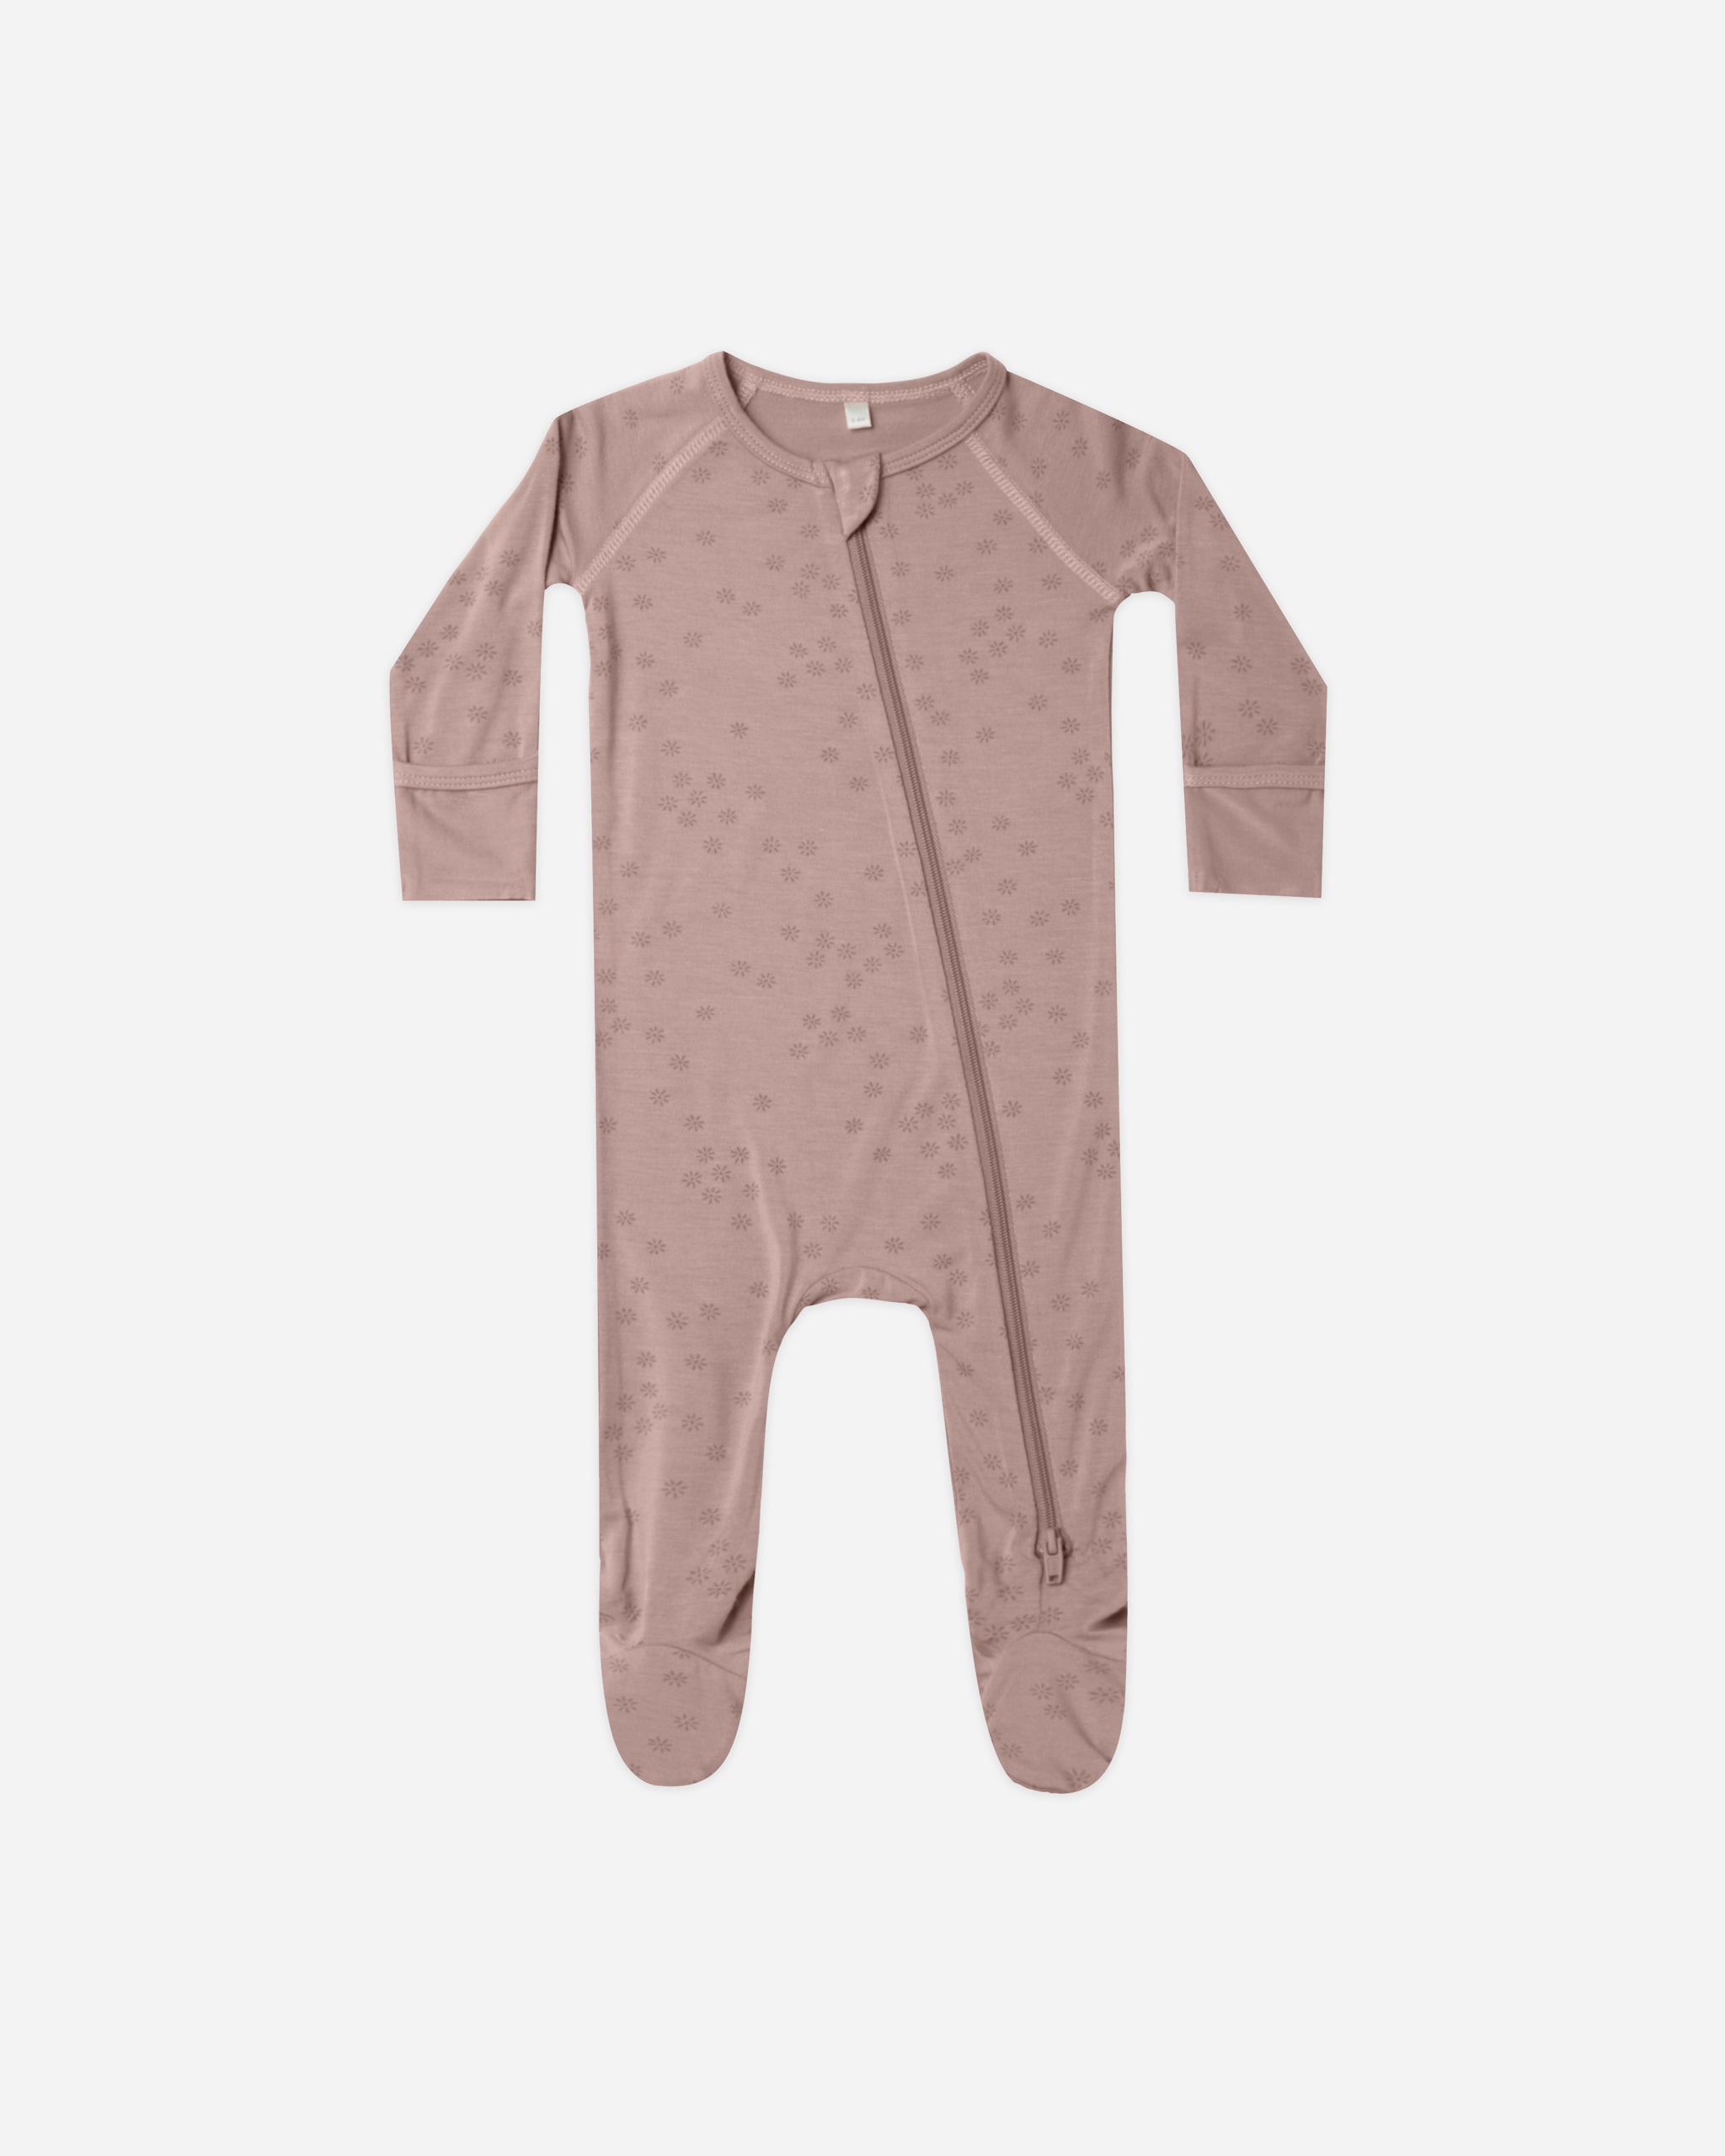 Bamboo Zip Footie || Mauve Bloom - Rylee + Cru | Kids Clothes | Trendy Baby Clothes | Modern Infant Outfits |